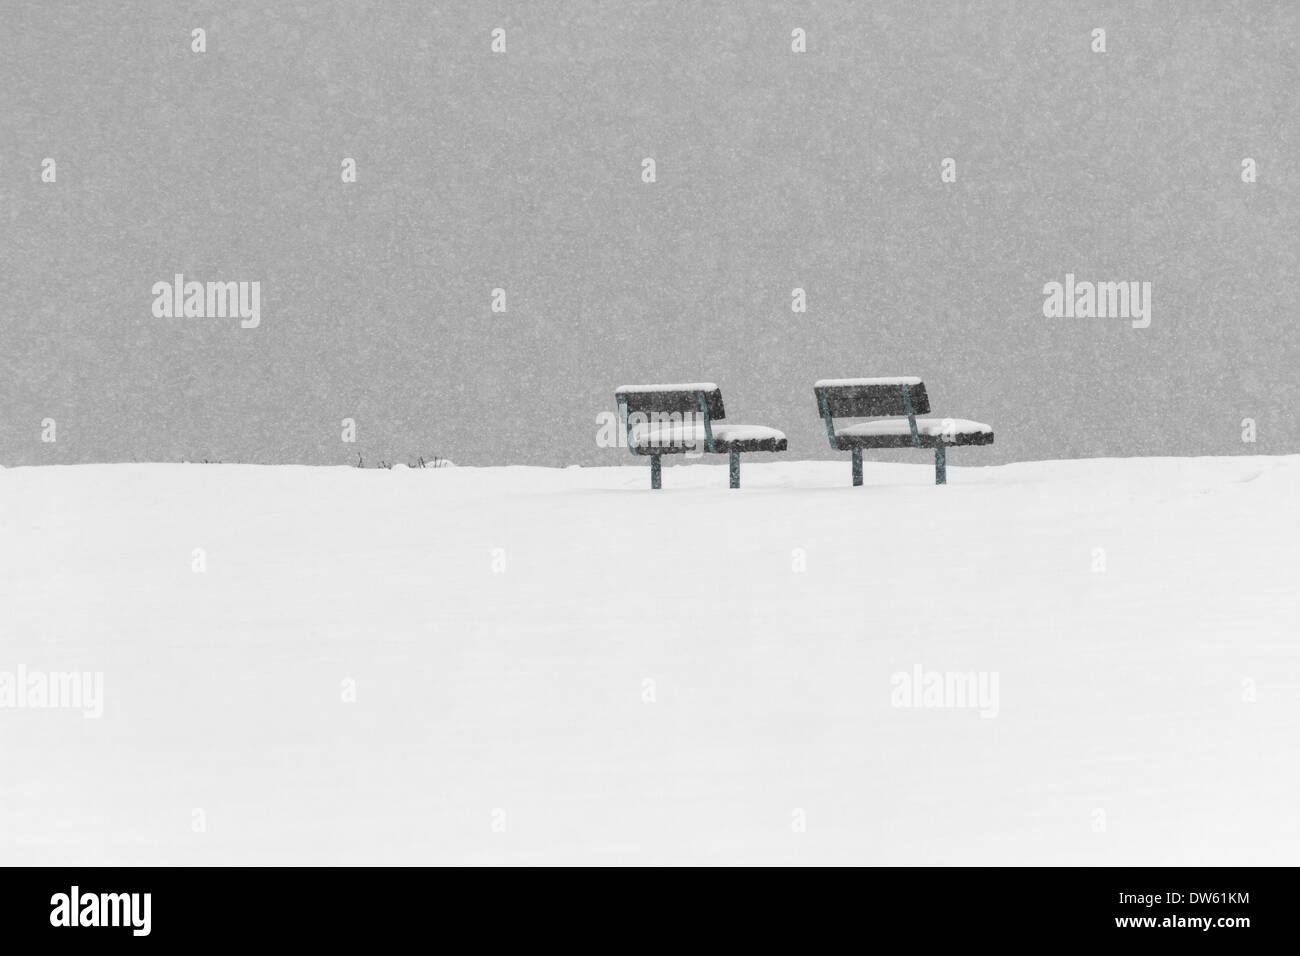 Bench in Winter, snowing Stock Photo